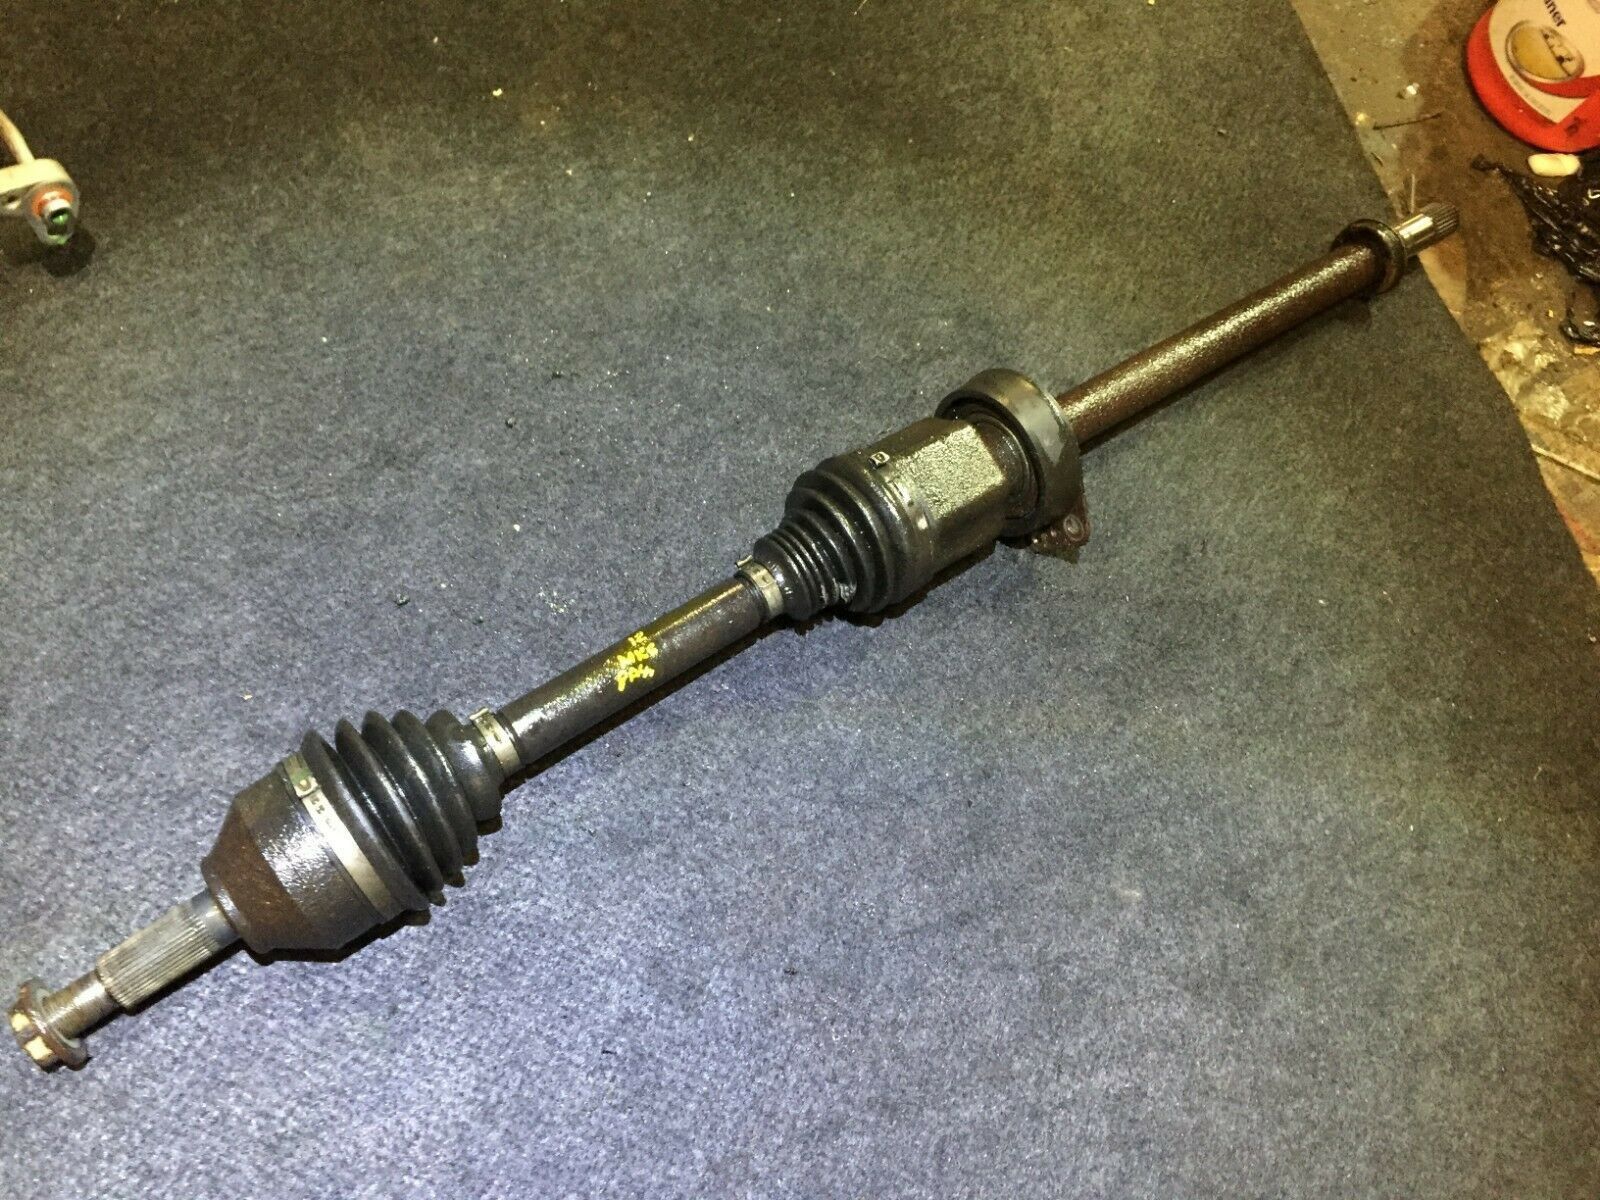 Axle CV joint Ford promaster transit caravan bmw Nissan maxima nv 200 1500 Mercedes gl450 parts parting out